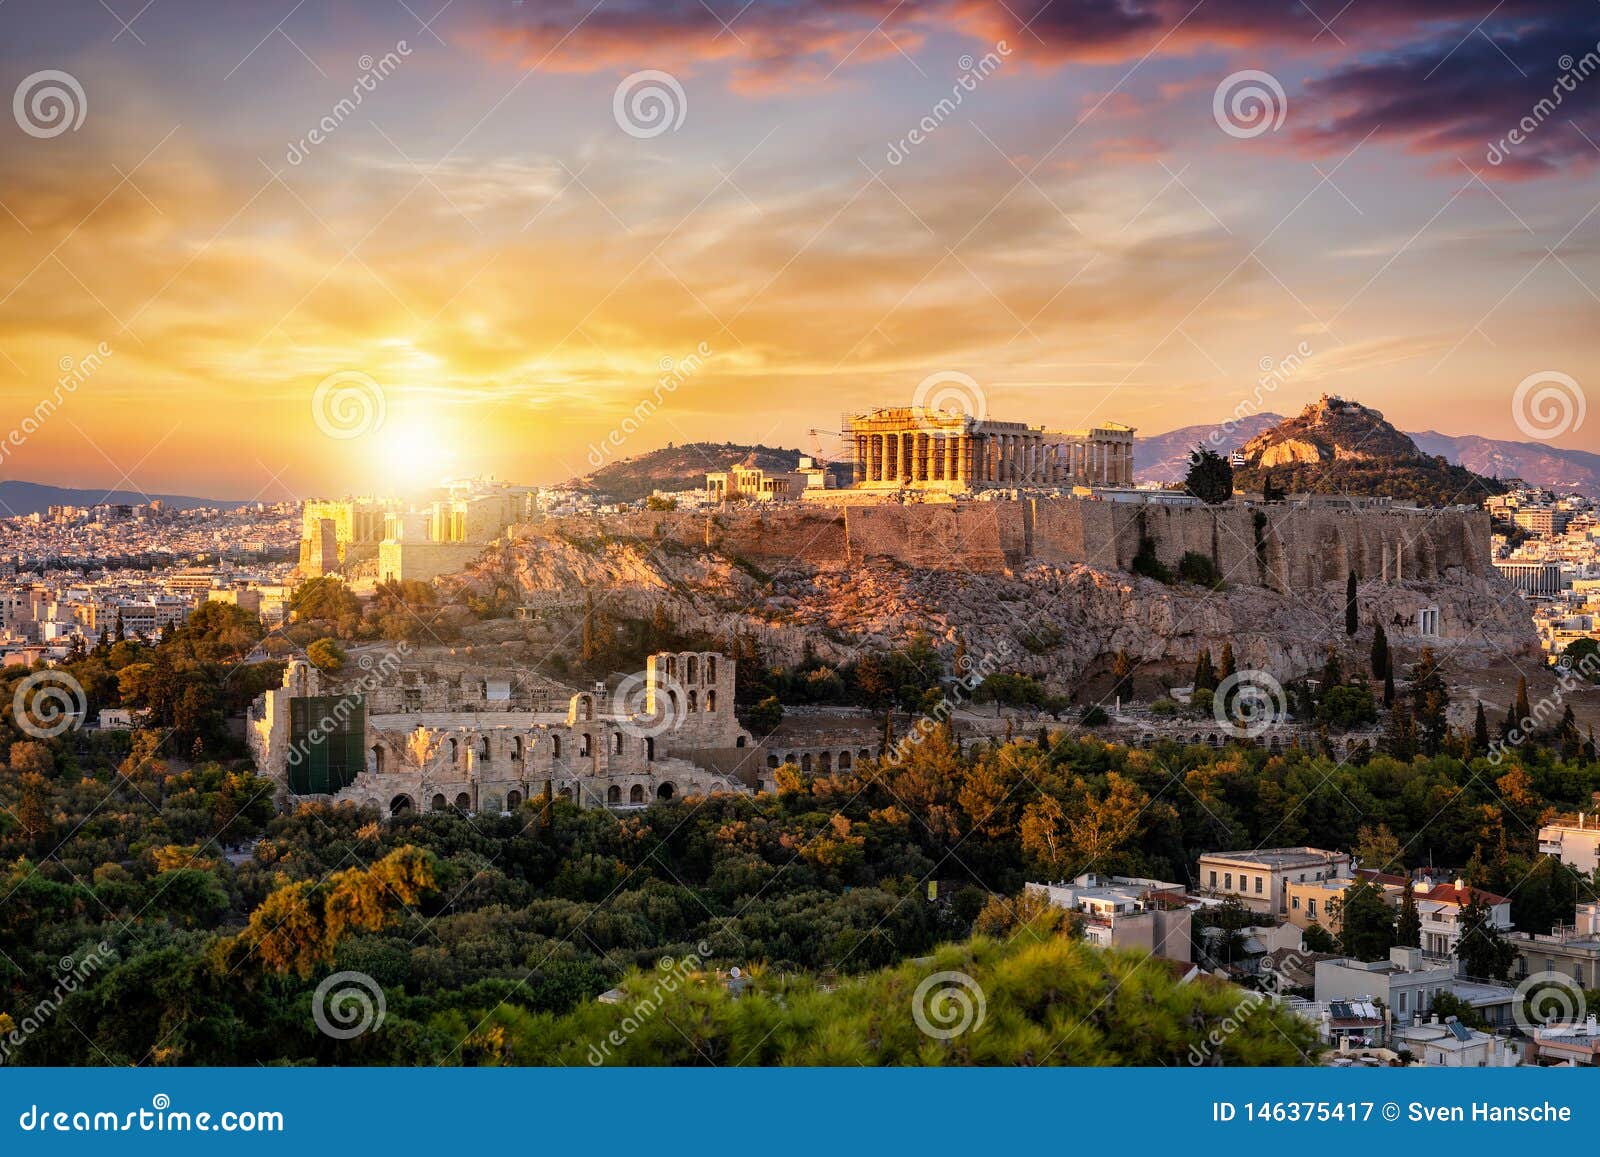 view to the parthenon temple at the acropolis of athens, greece